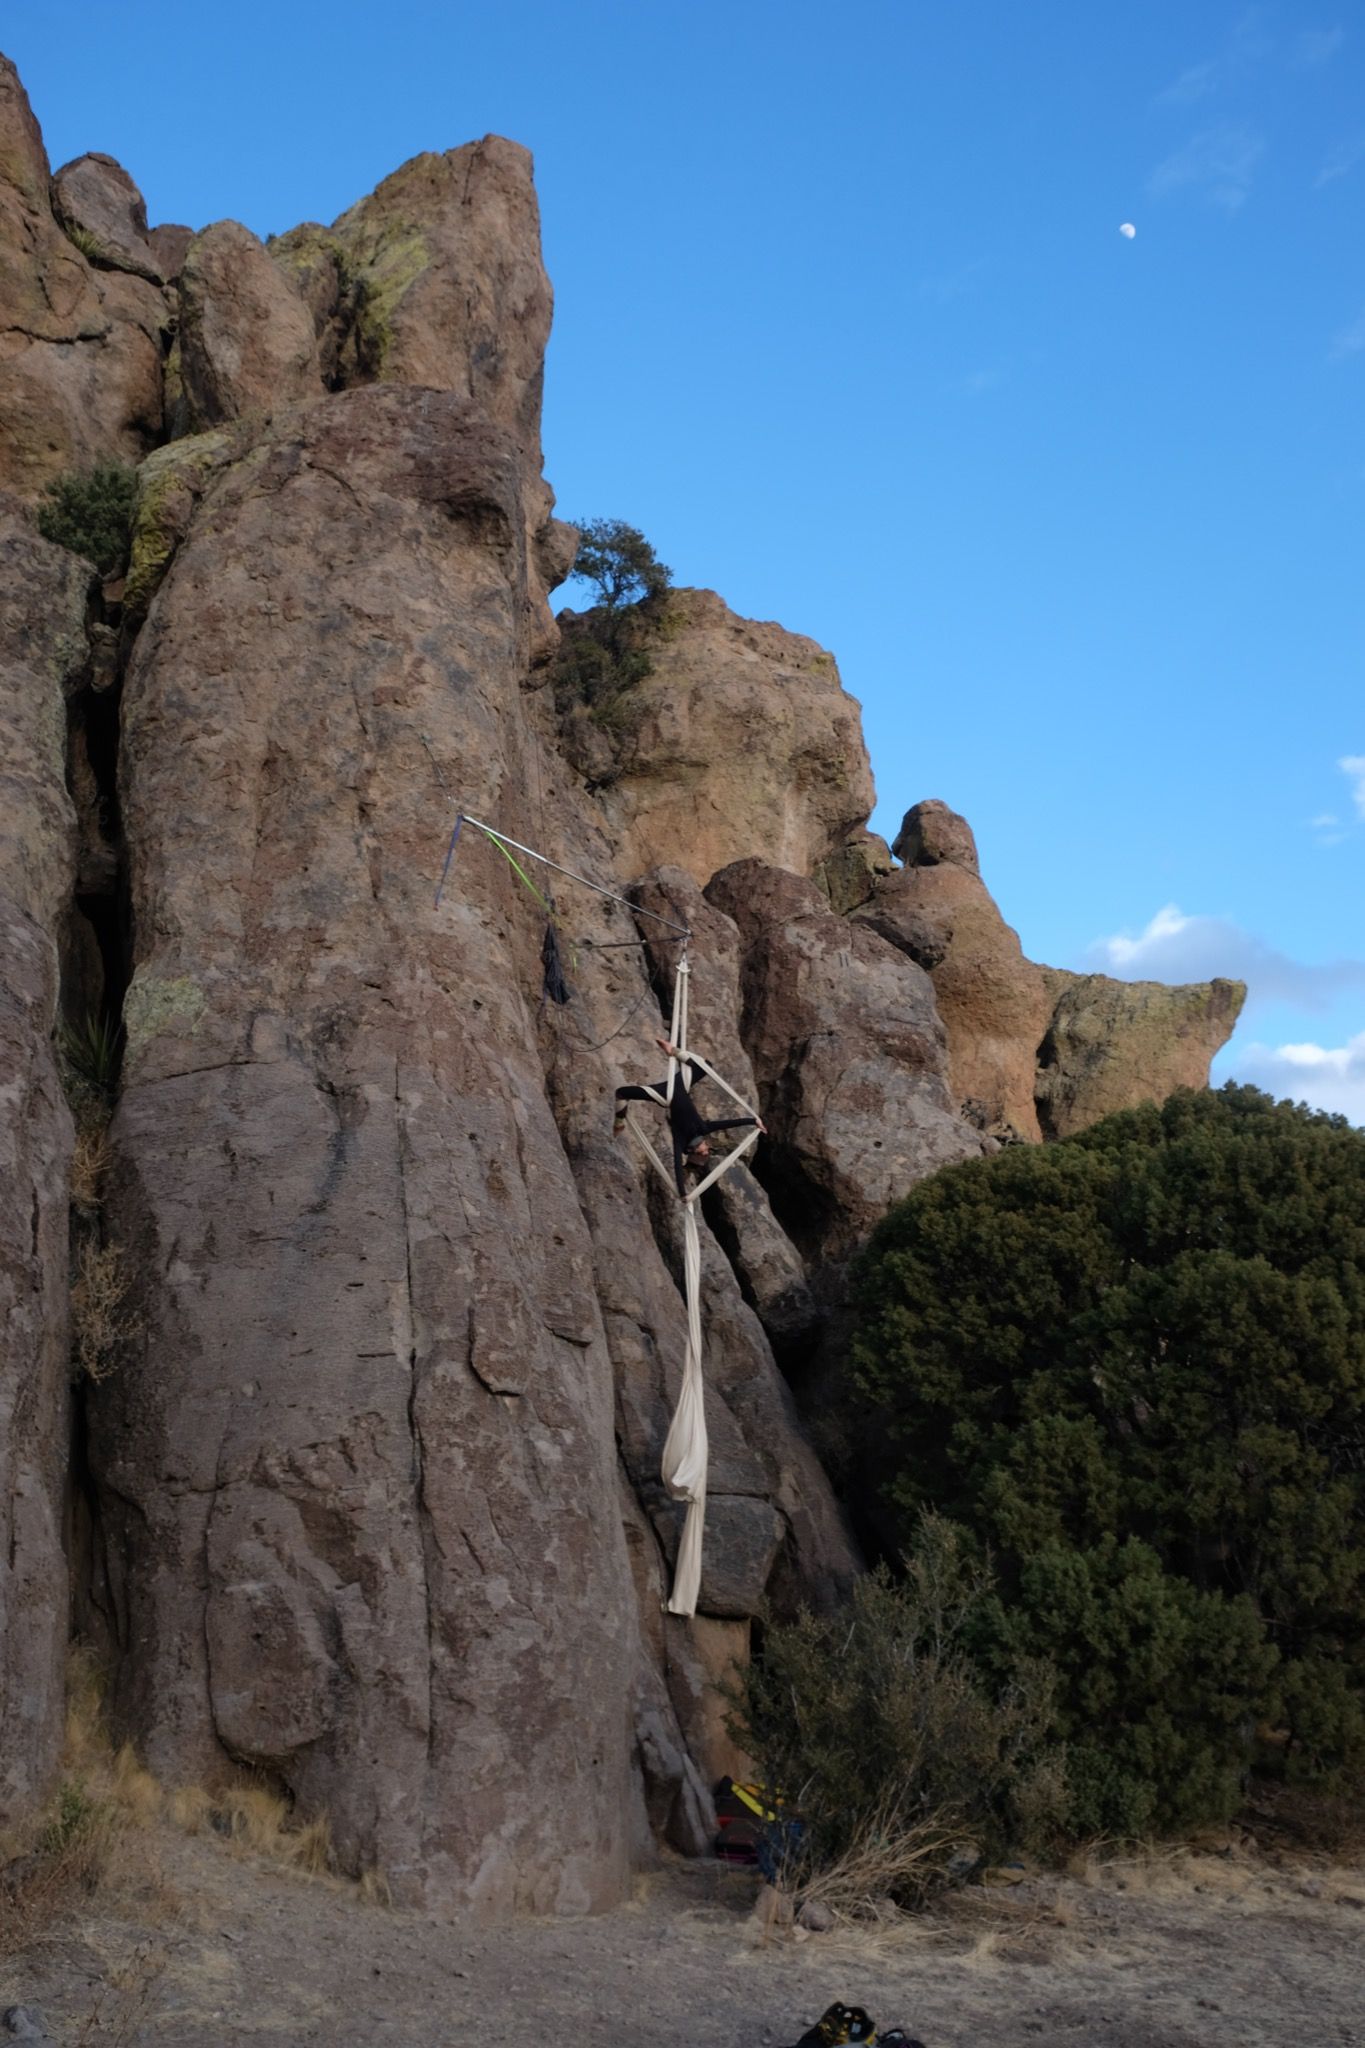 Woman hangs off apparatus, performing aerial silks with white fabric, off cliff face